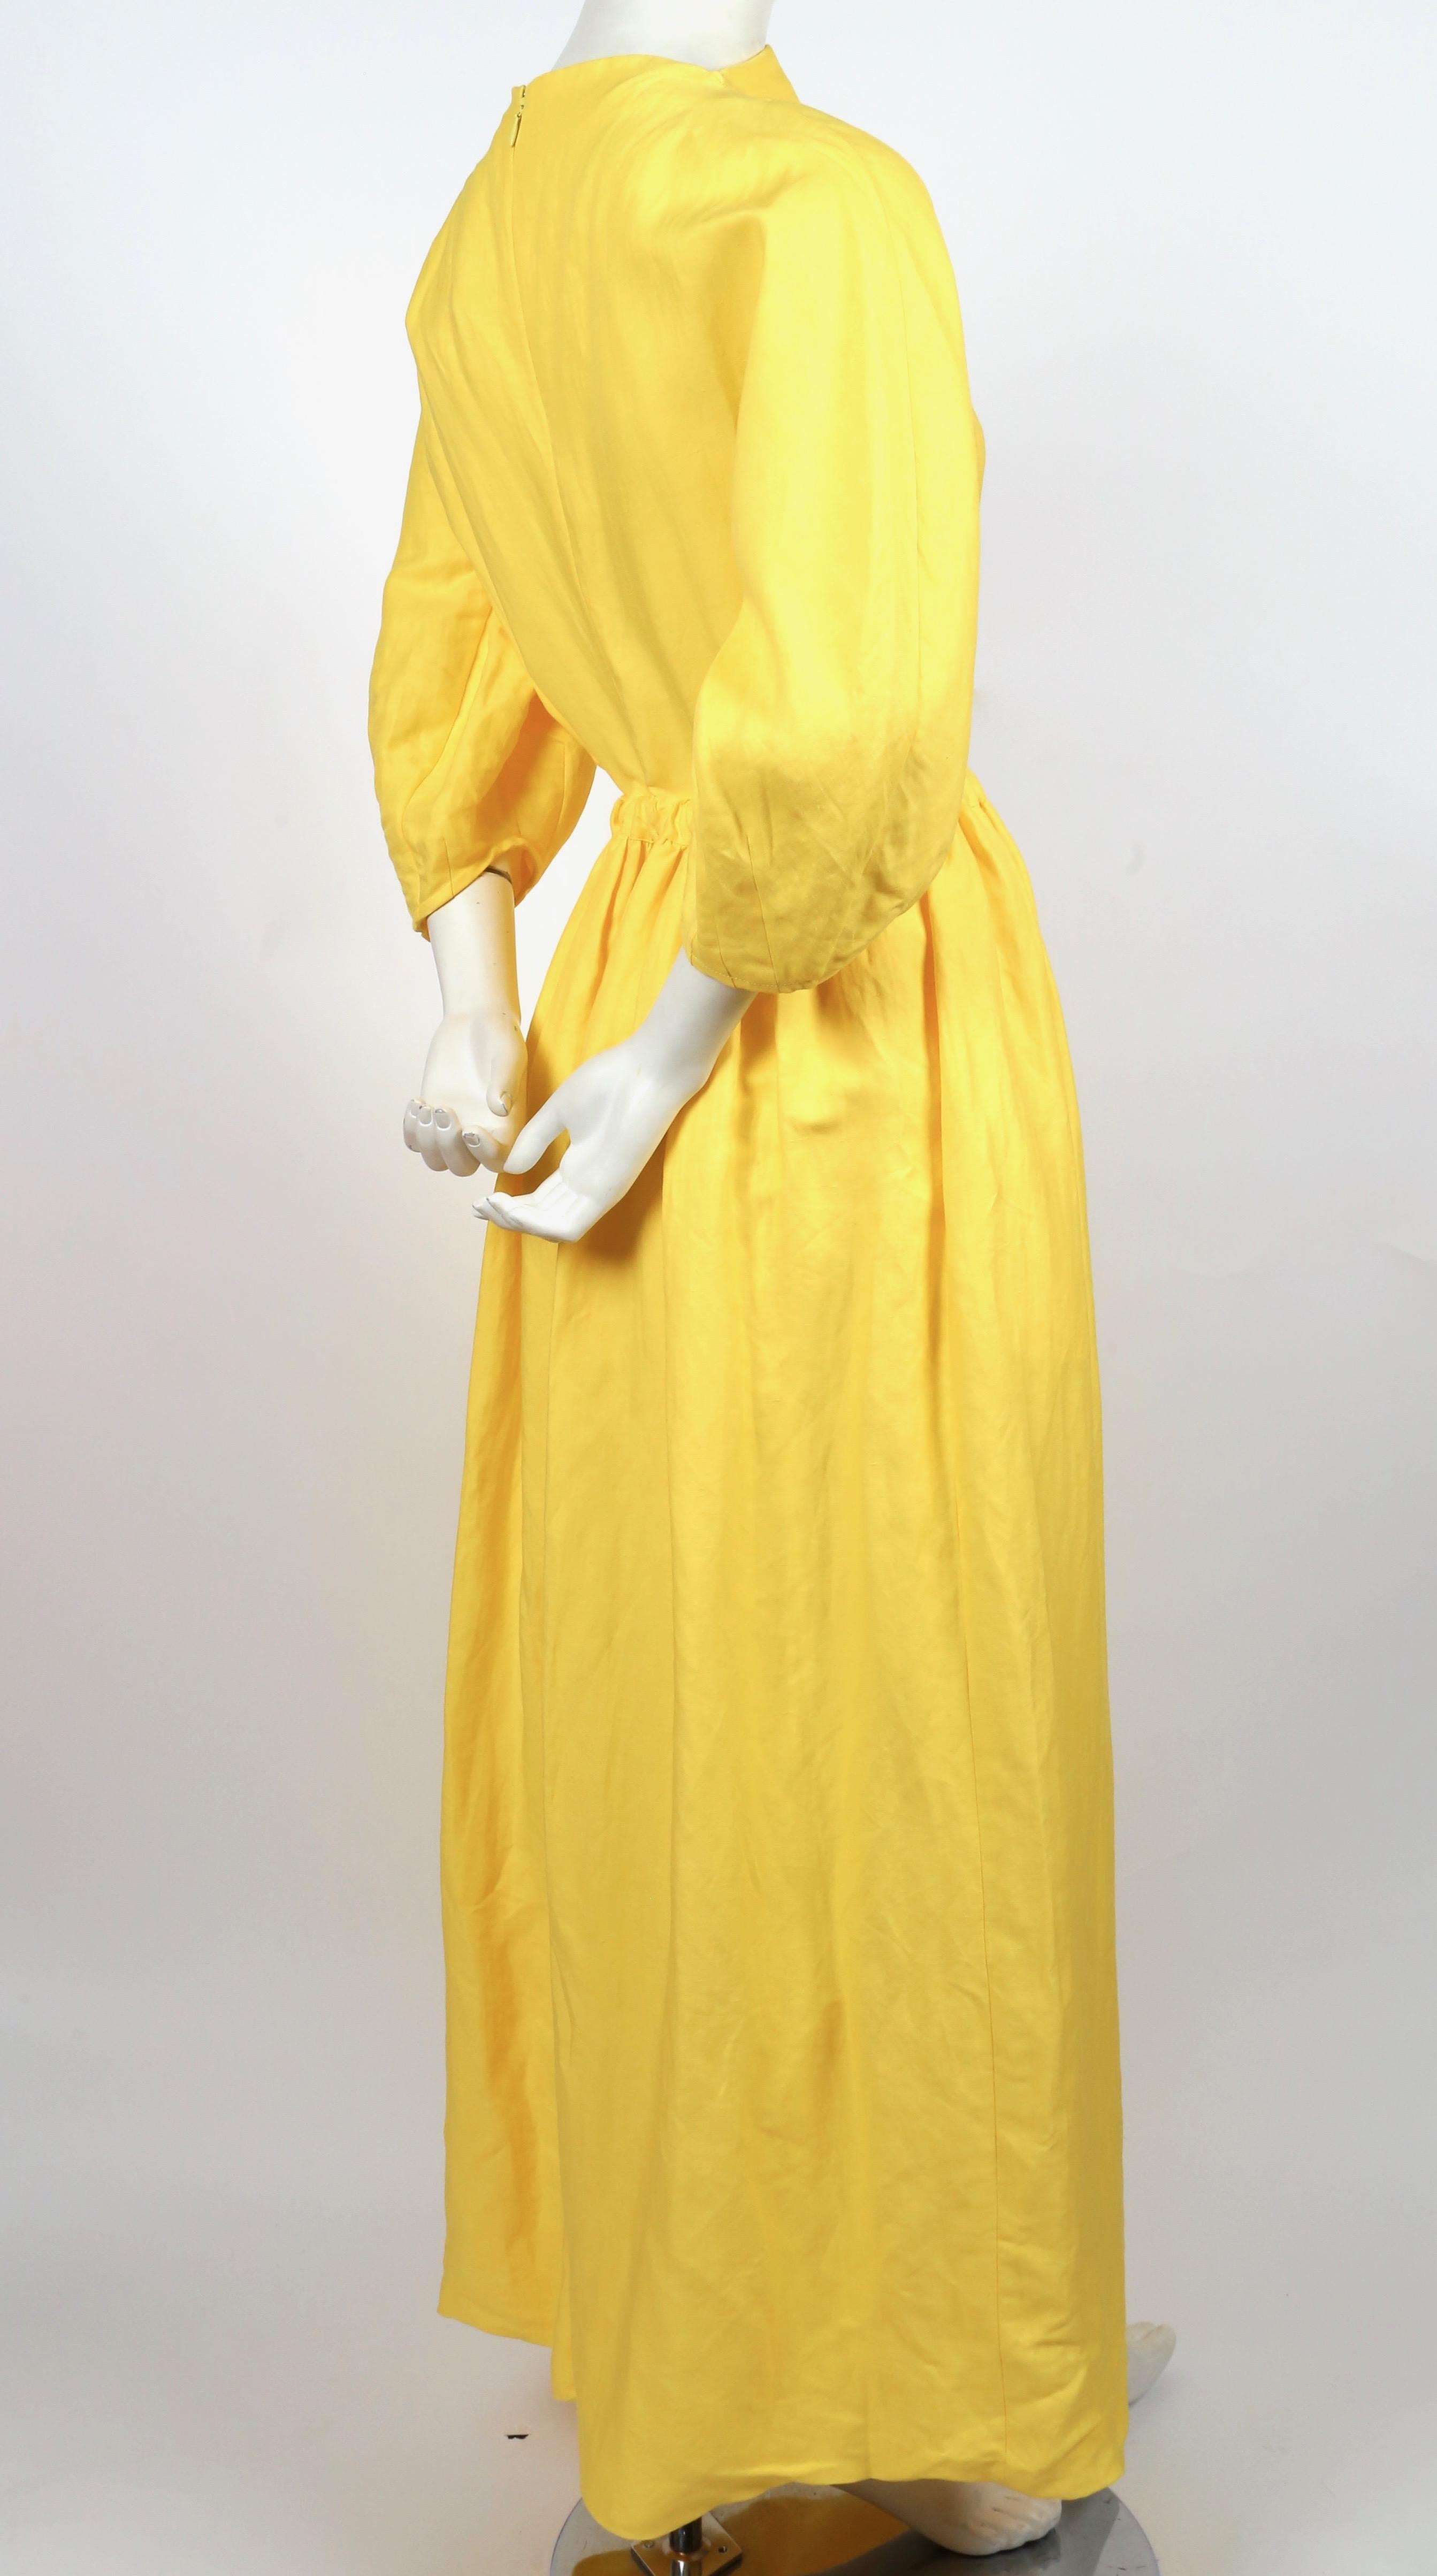 Yellow 2018 CELINE by PHOEBE PHILO yellow linen maxi dress with cutout